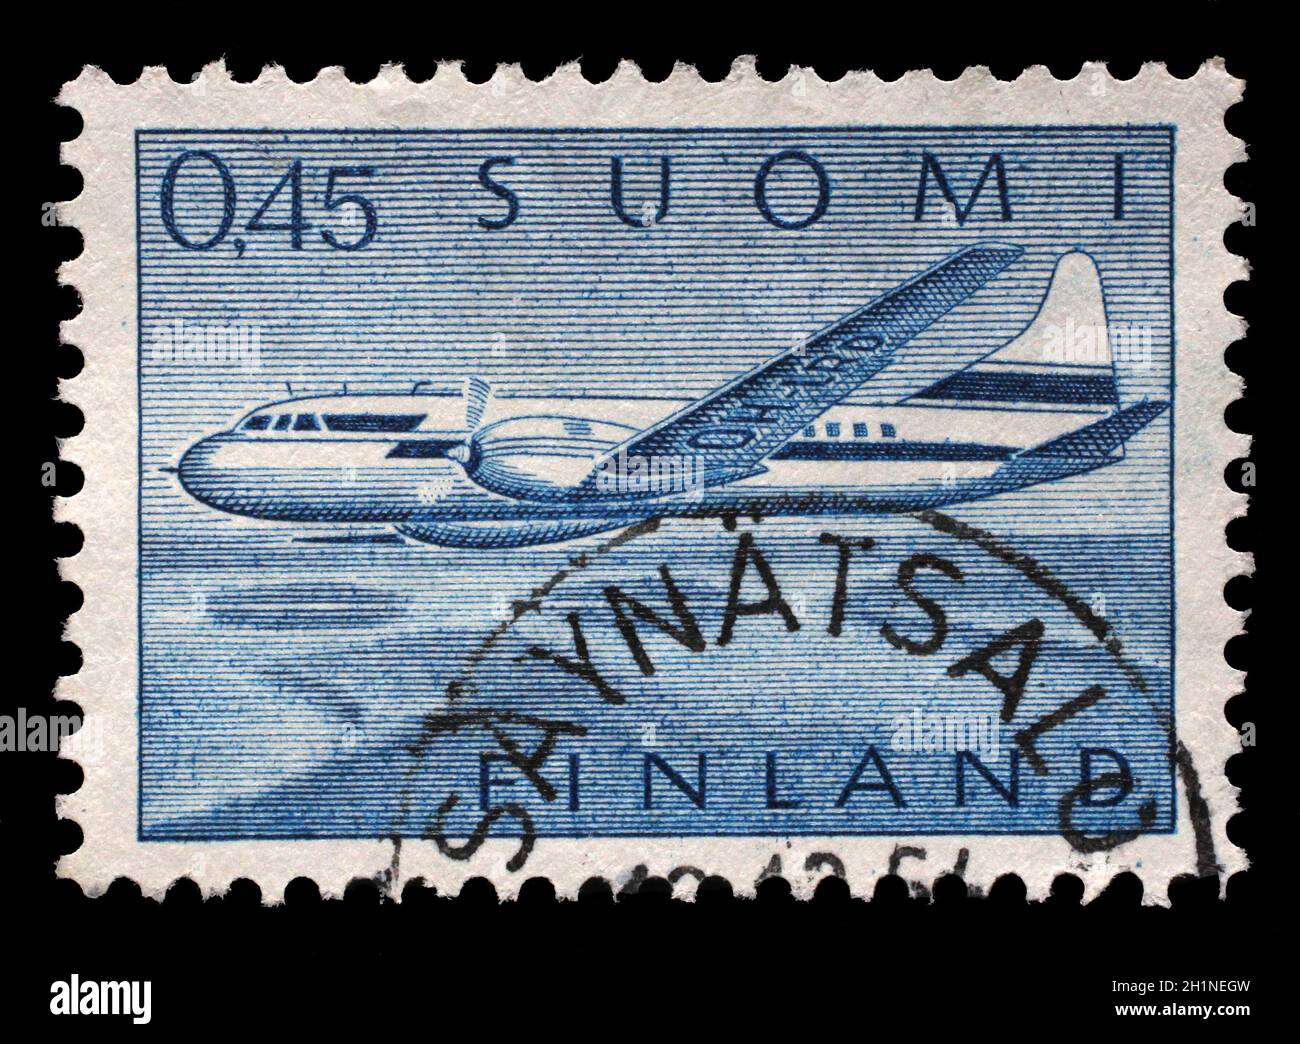 Stamp printed in Finland shows Aircraft Convair 440 over Lake Landscape, circa 1963 Stock Photo